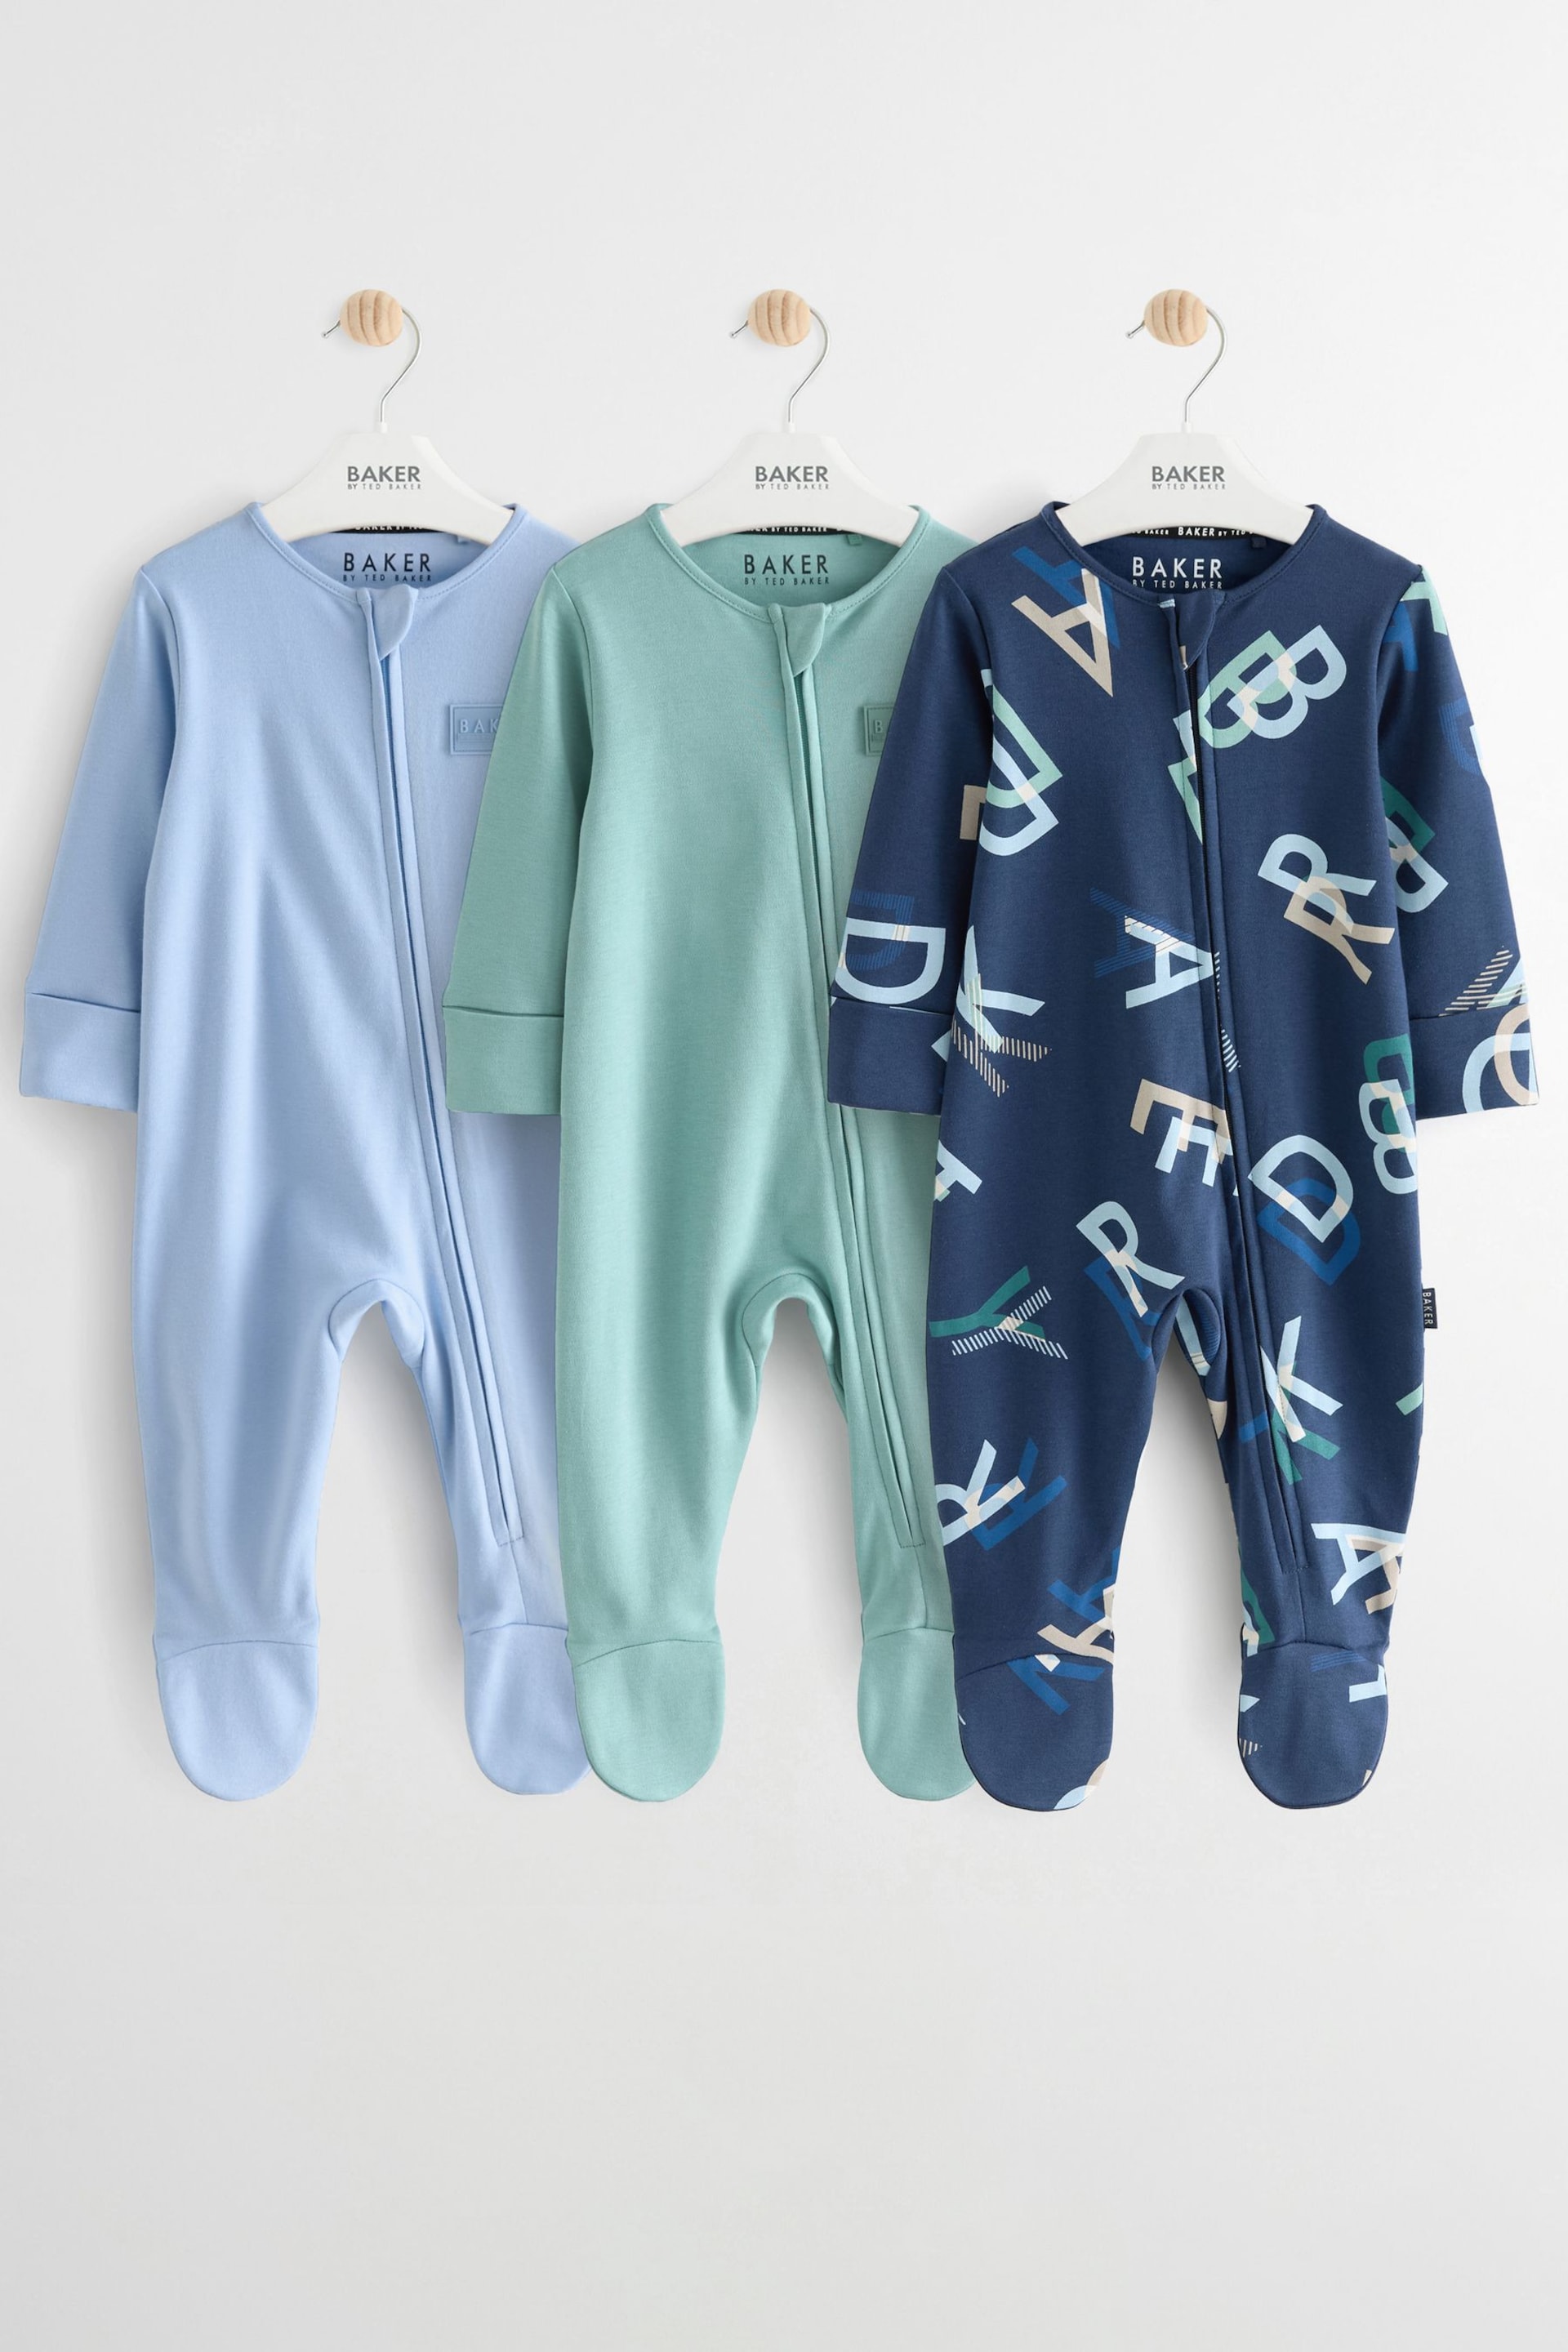 Baker by Ted Baker Sleepsuit 3 Pack - Image 1 of 7